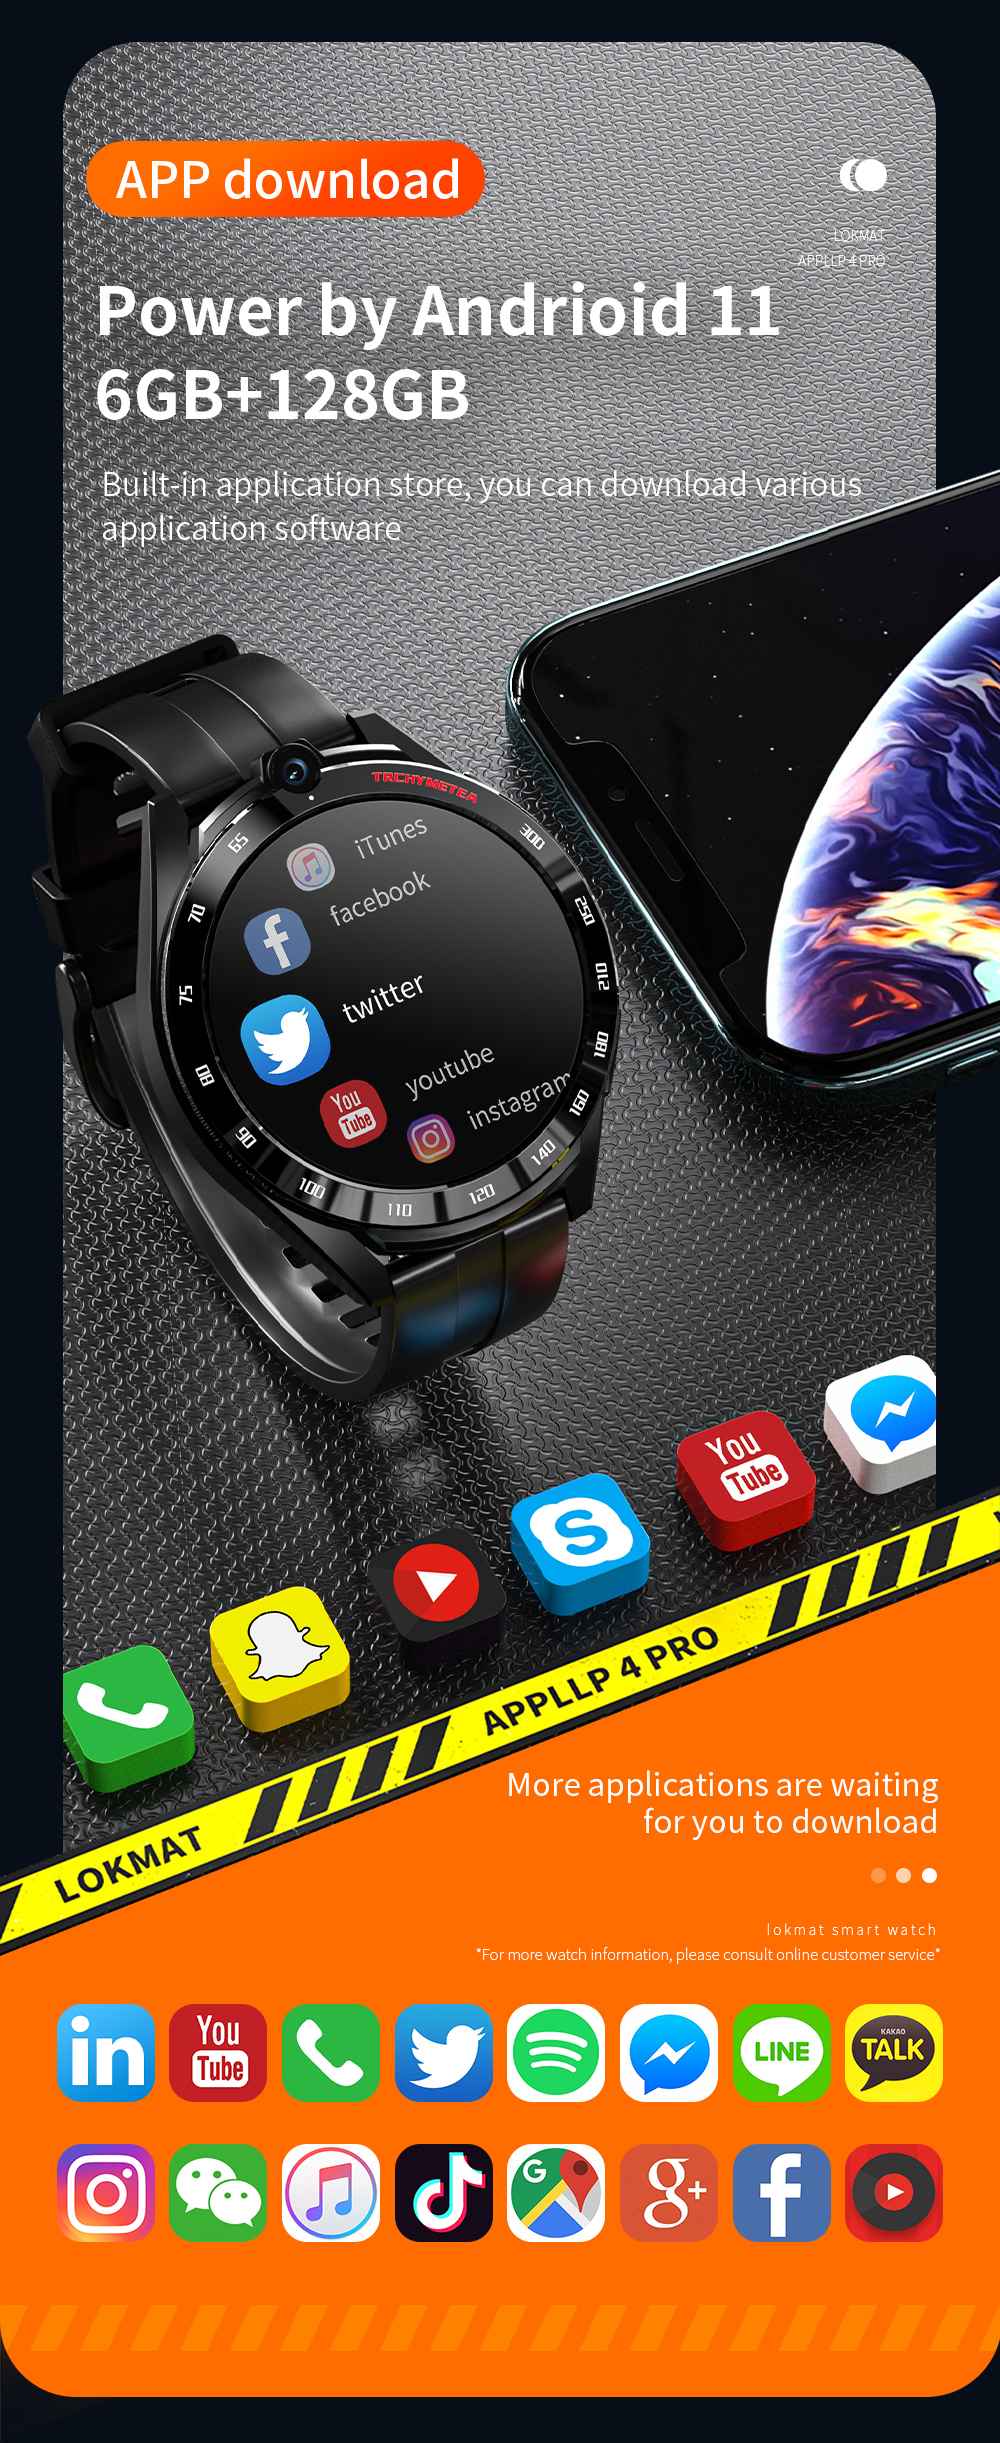 LOKMAT APPLLP 4 PRO Android 11 Smartwatch with 6GB RAM 128GB ROM 1.6'' TFT Screen Fitness Tracker Watch Phone with Power Bank